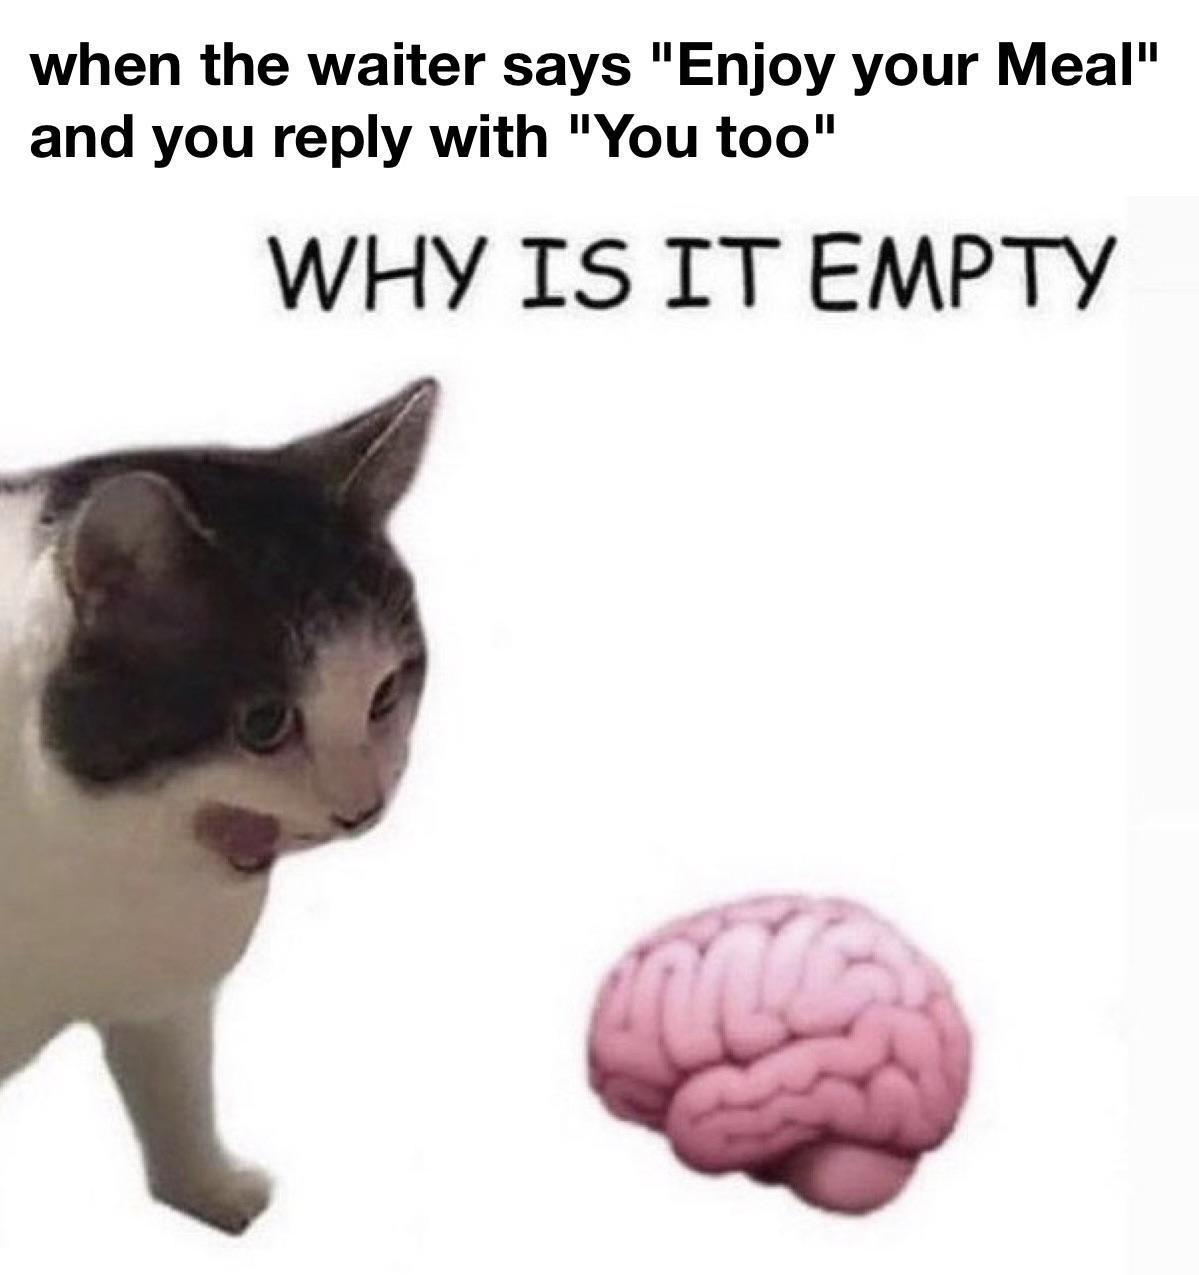 empty brain meme - when the waiter says "Enjoy your Meal" and you with "You too" Why Is It Empty